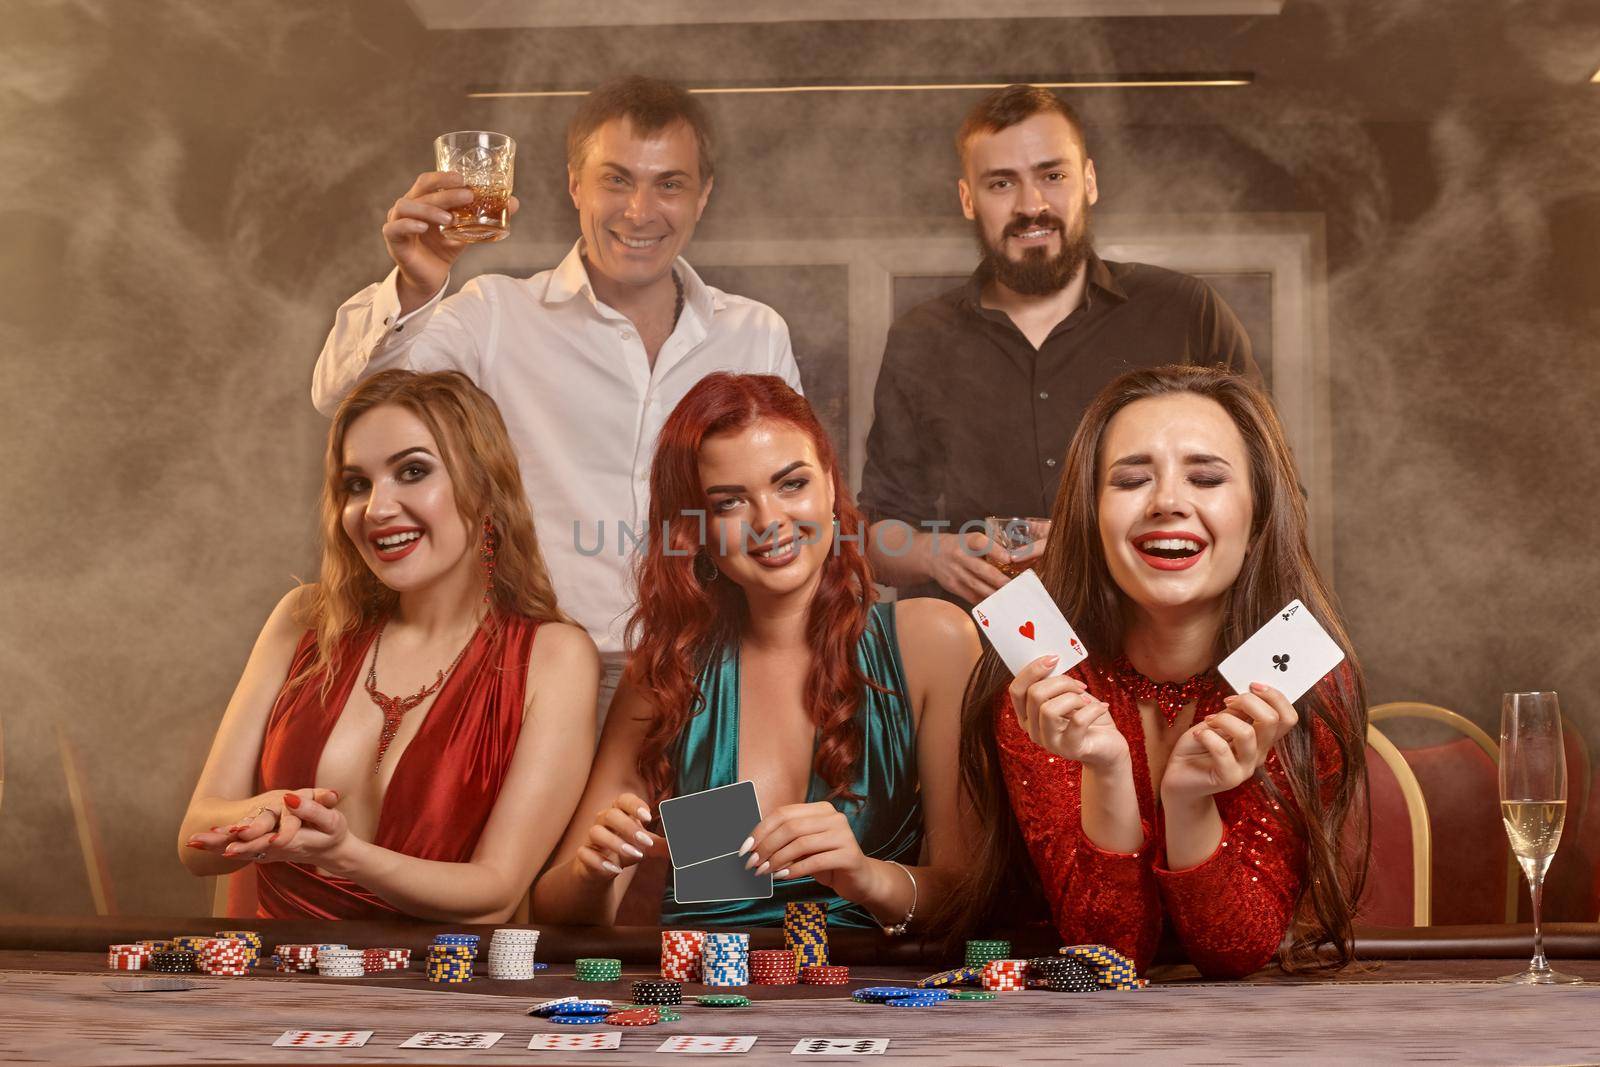 Joyful classmates are playing poker at casino. They are celebrating their win, smiling and posing at the table against a dark smoke background. Cards, chips, money, alcohol, fortune, gambling, entertainment concept.